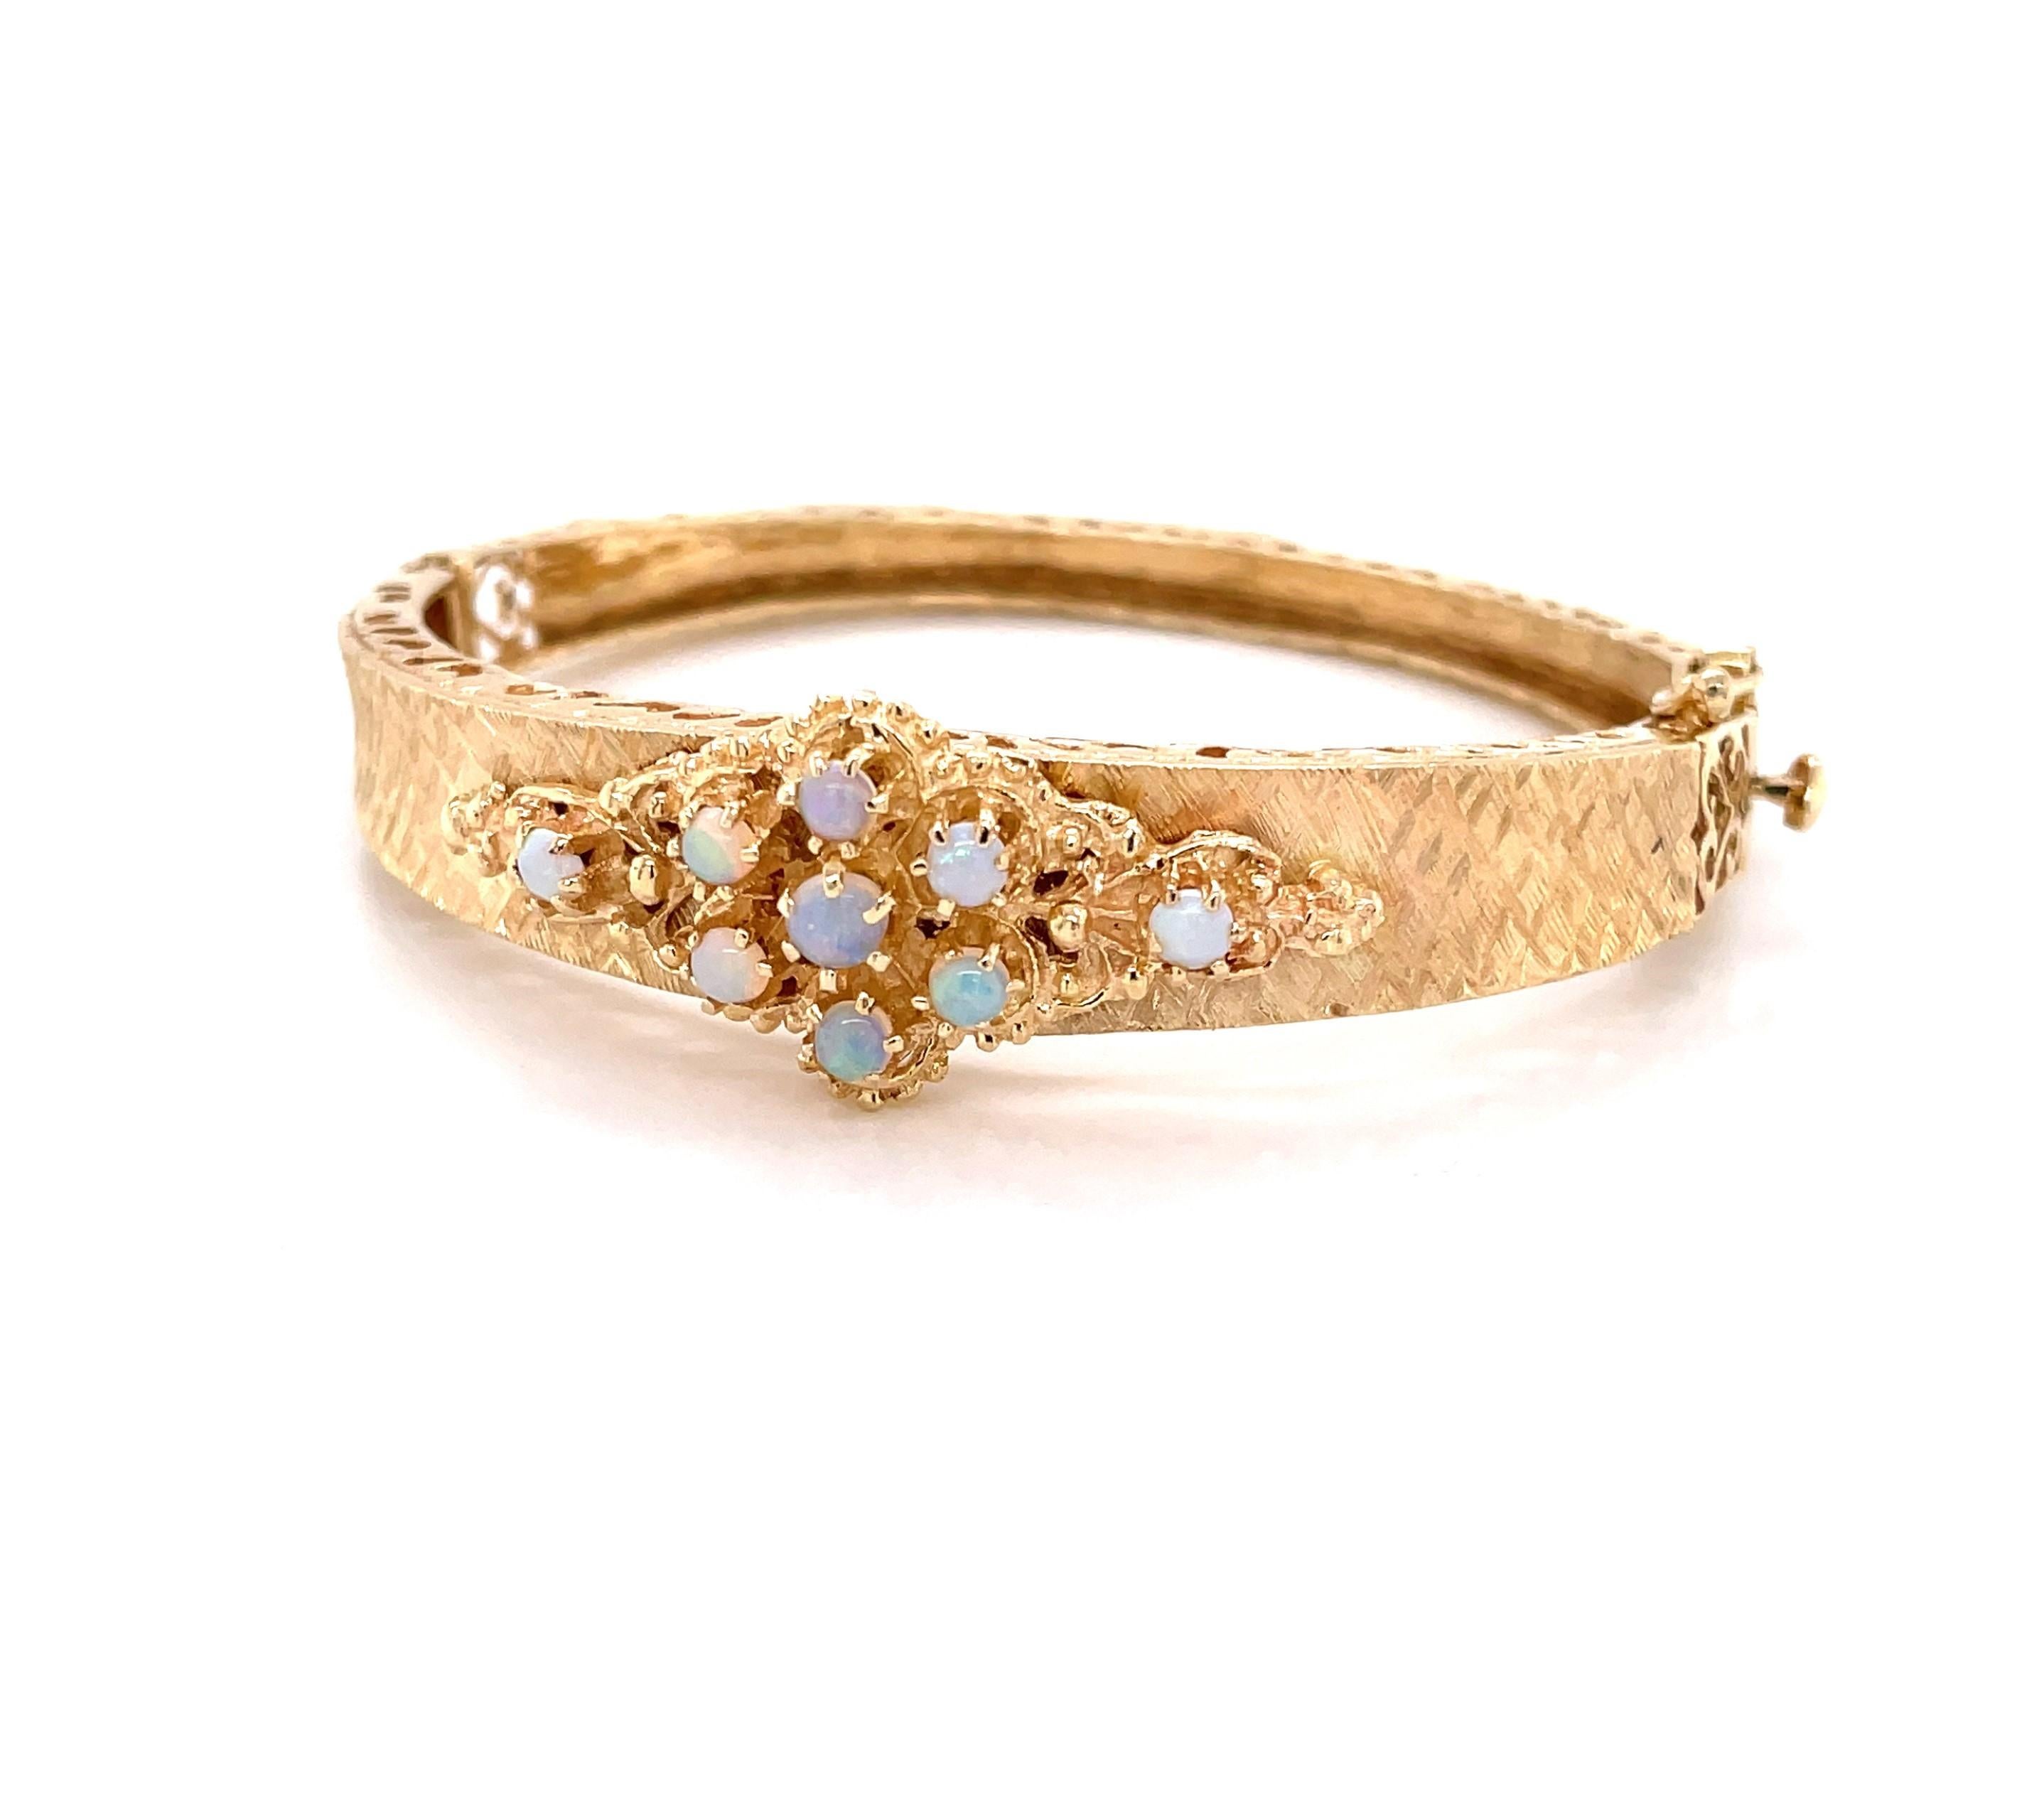 The iridescent natural opal cabochon cluster arranged at the front placket of this unique fourteen karat 14K yellow gold bangle bracelet gives this beautiful piece a regal feel. With filigree side appointments, the textured gold tapers to the back